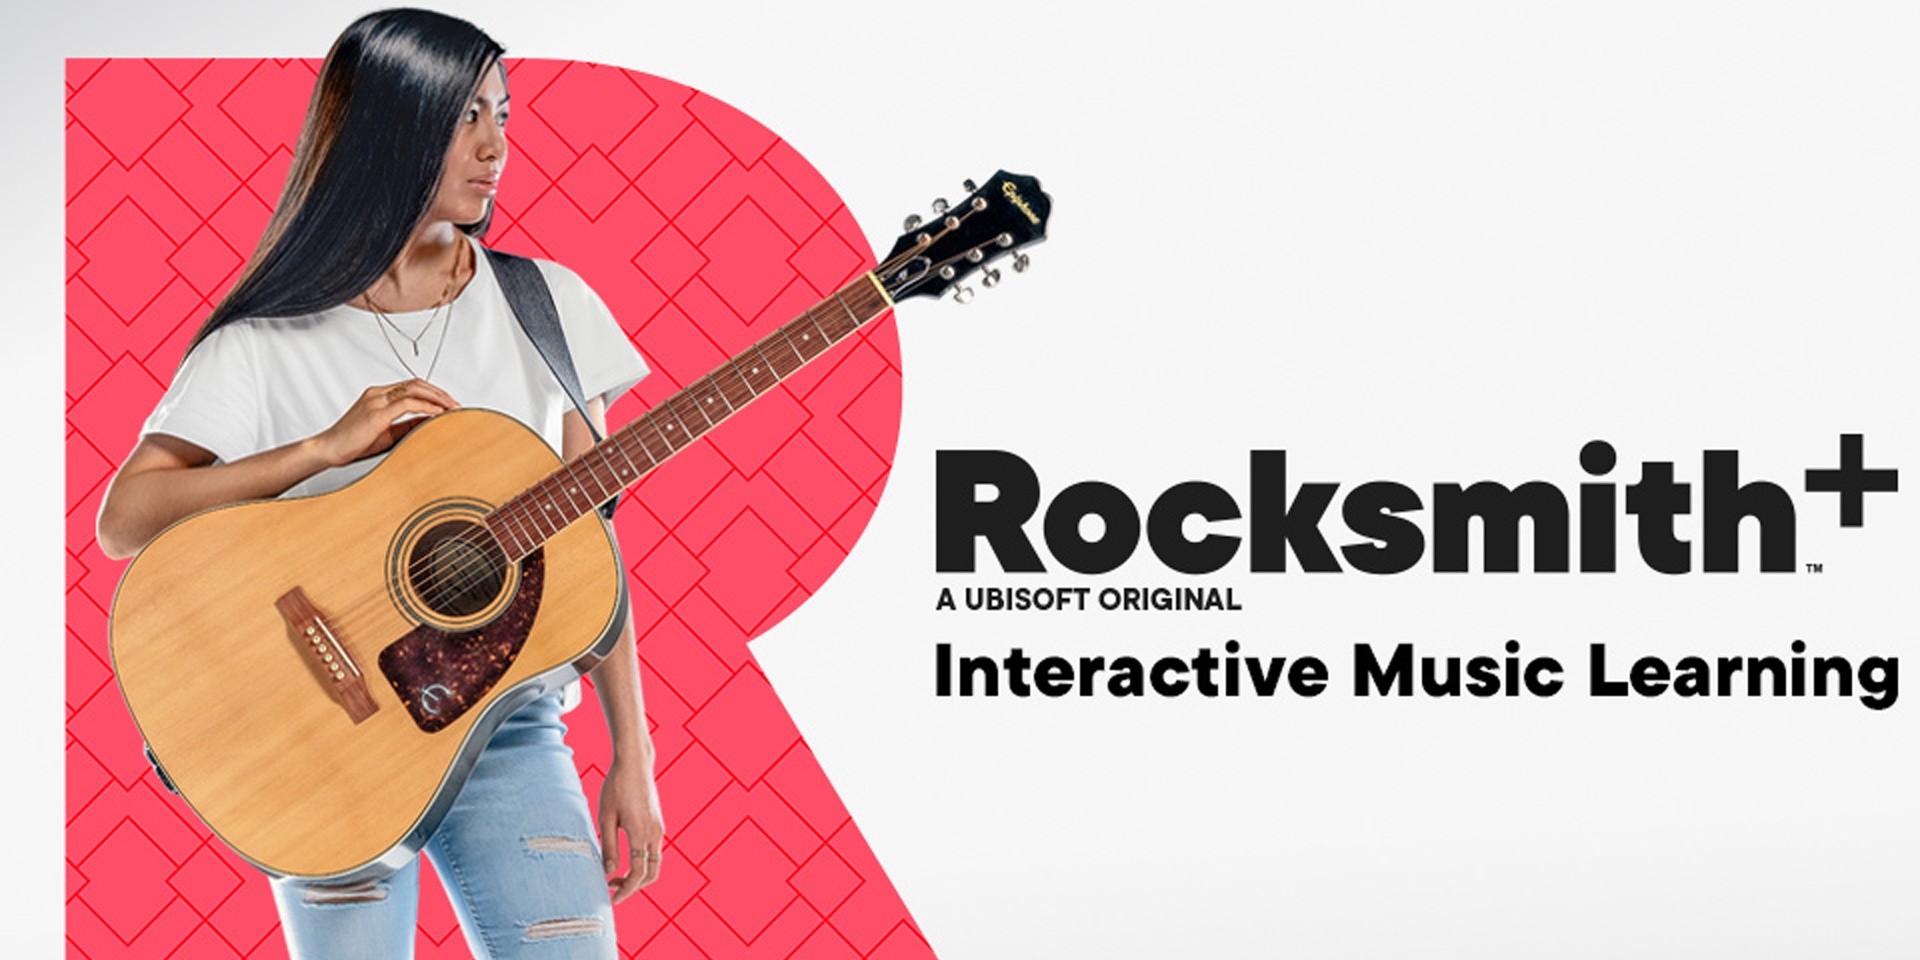 Level up your guitar skills on Rocksmith+ with your favorite bands' master recordings, real-time feedback, and more